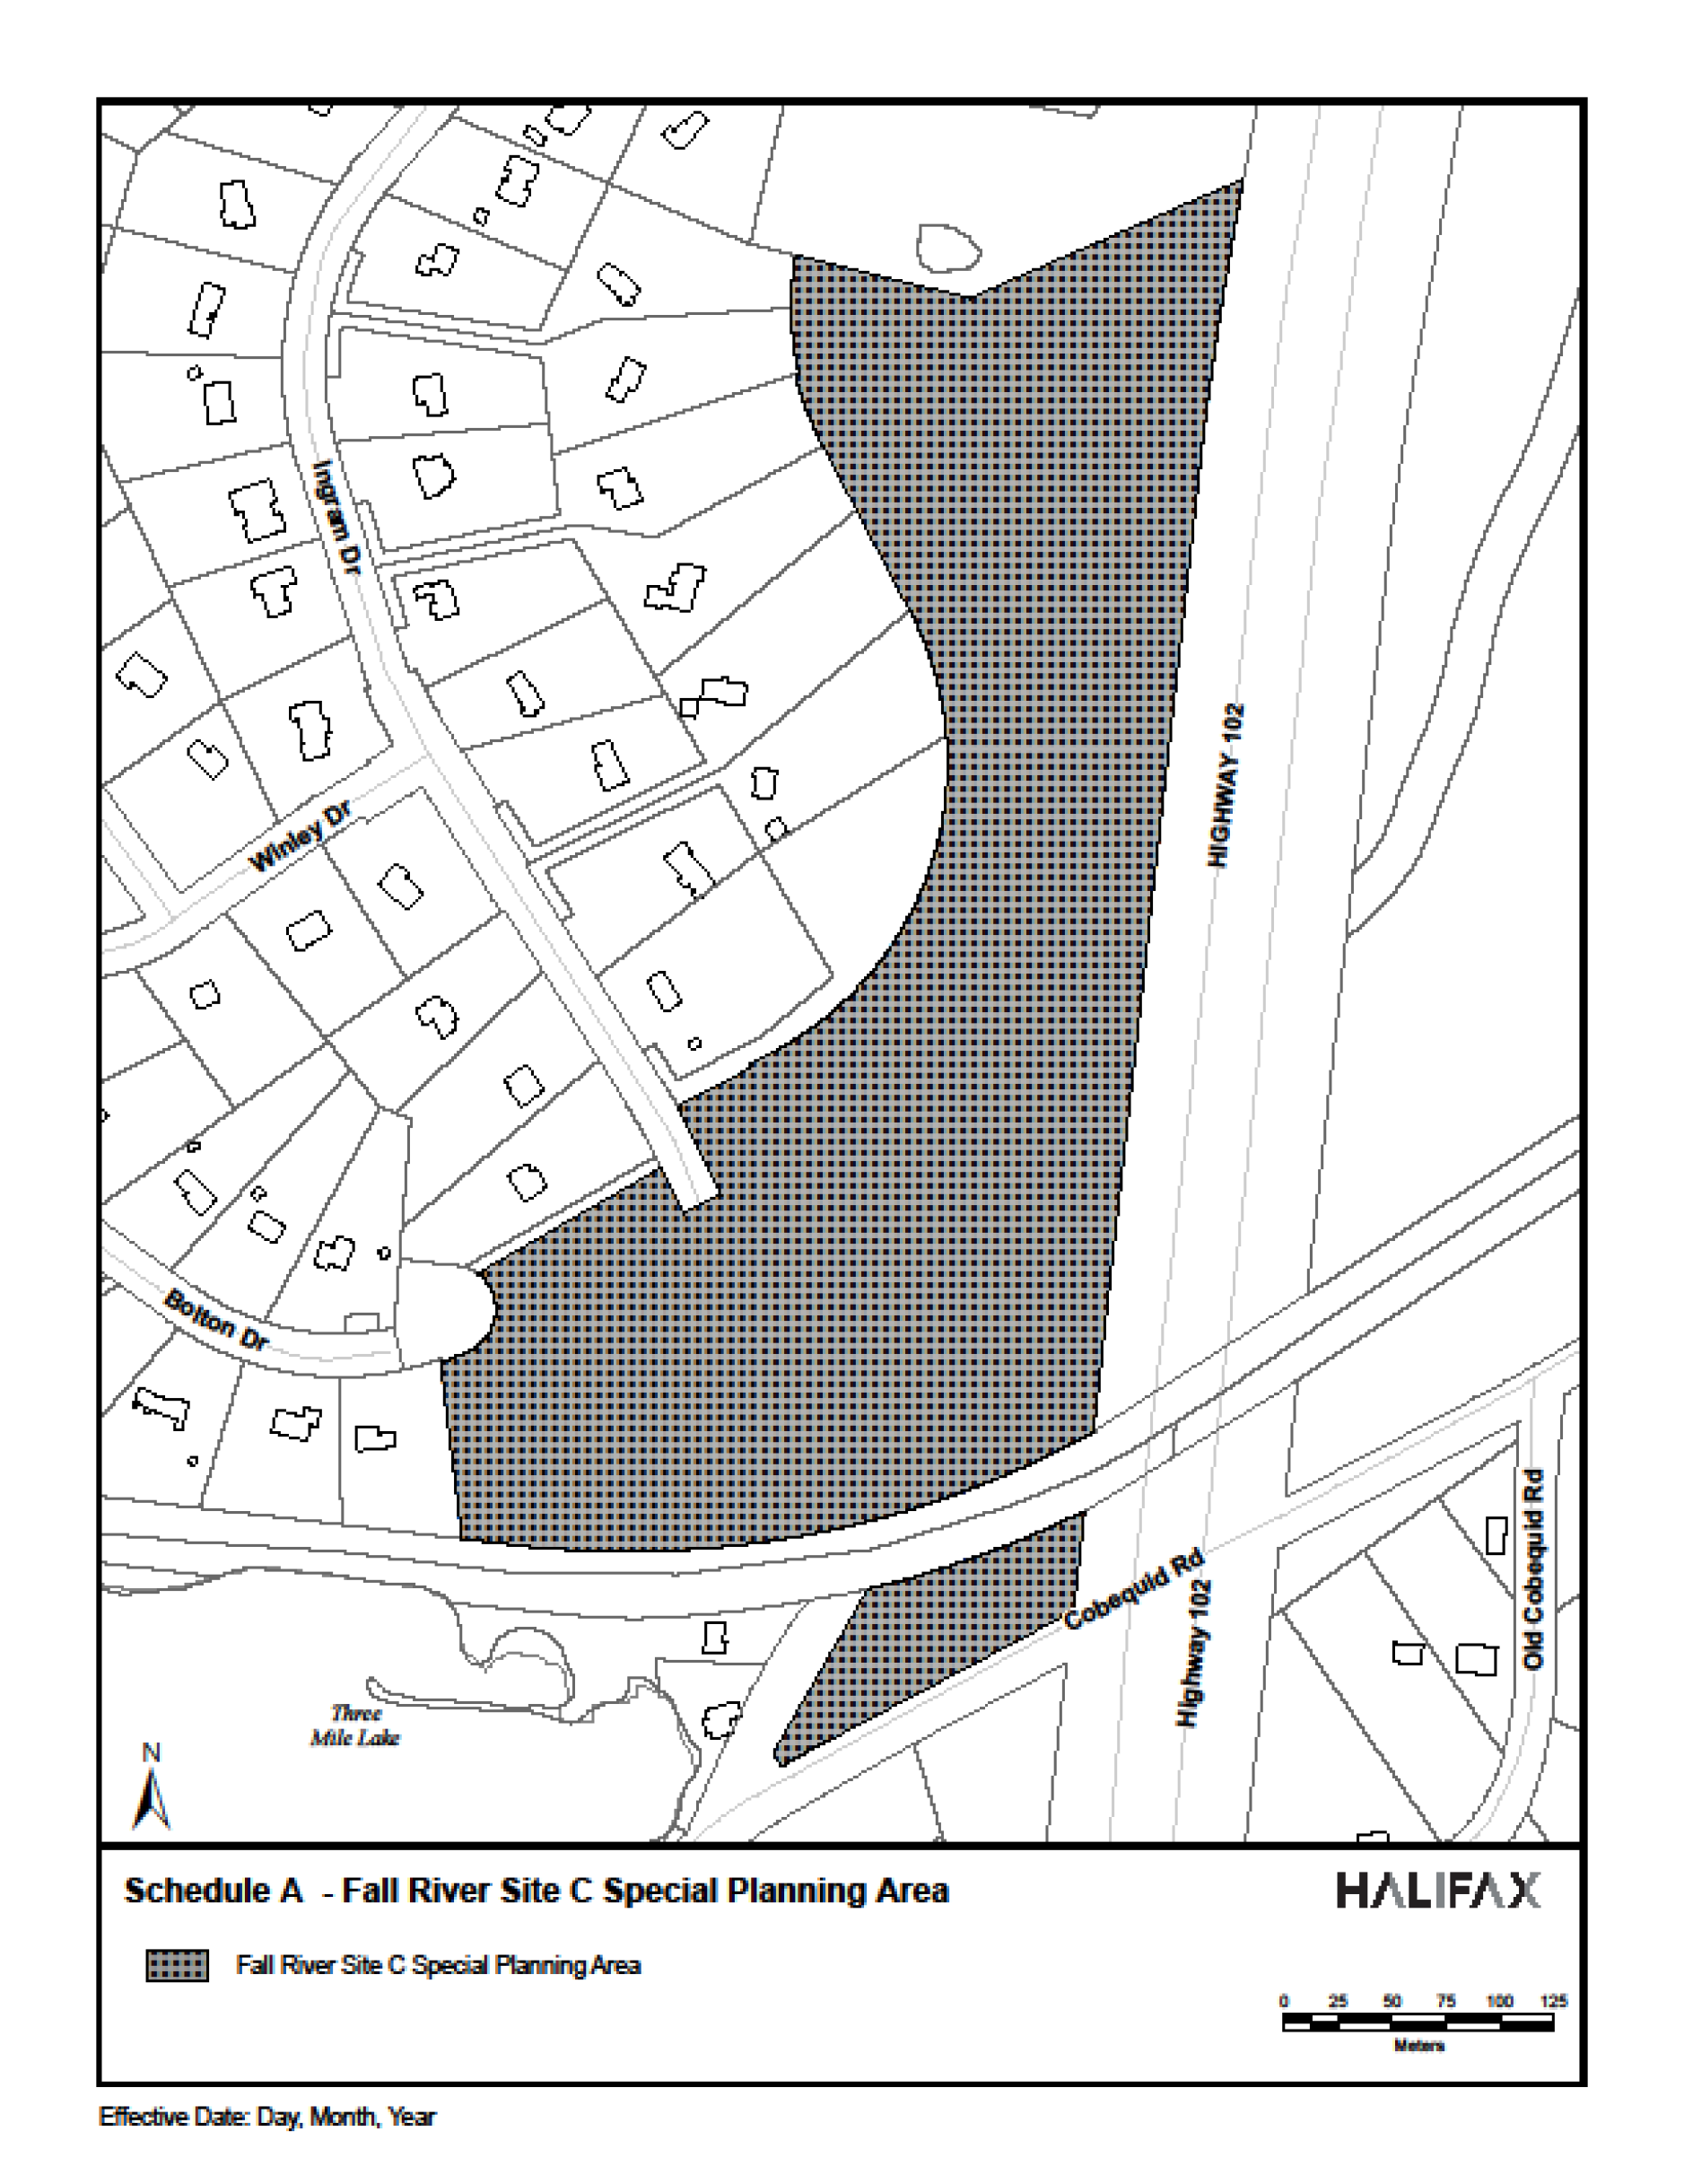 Graphic showing map of Fall River Site C Special Planning Area